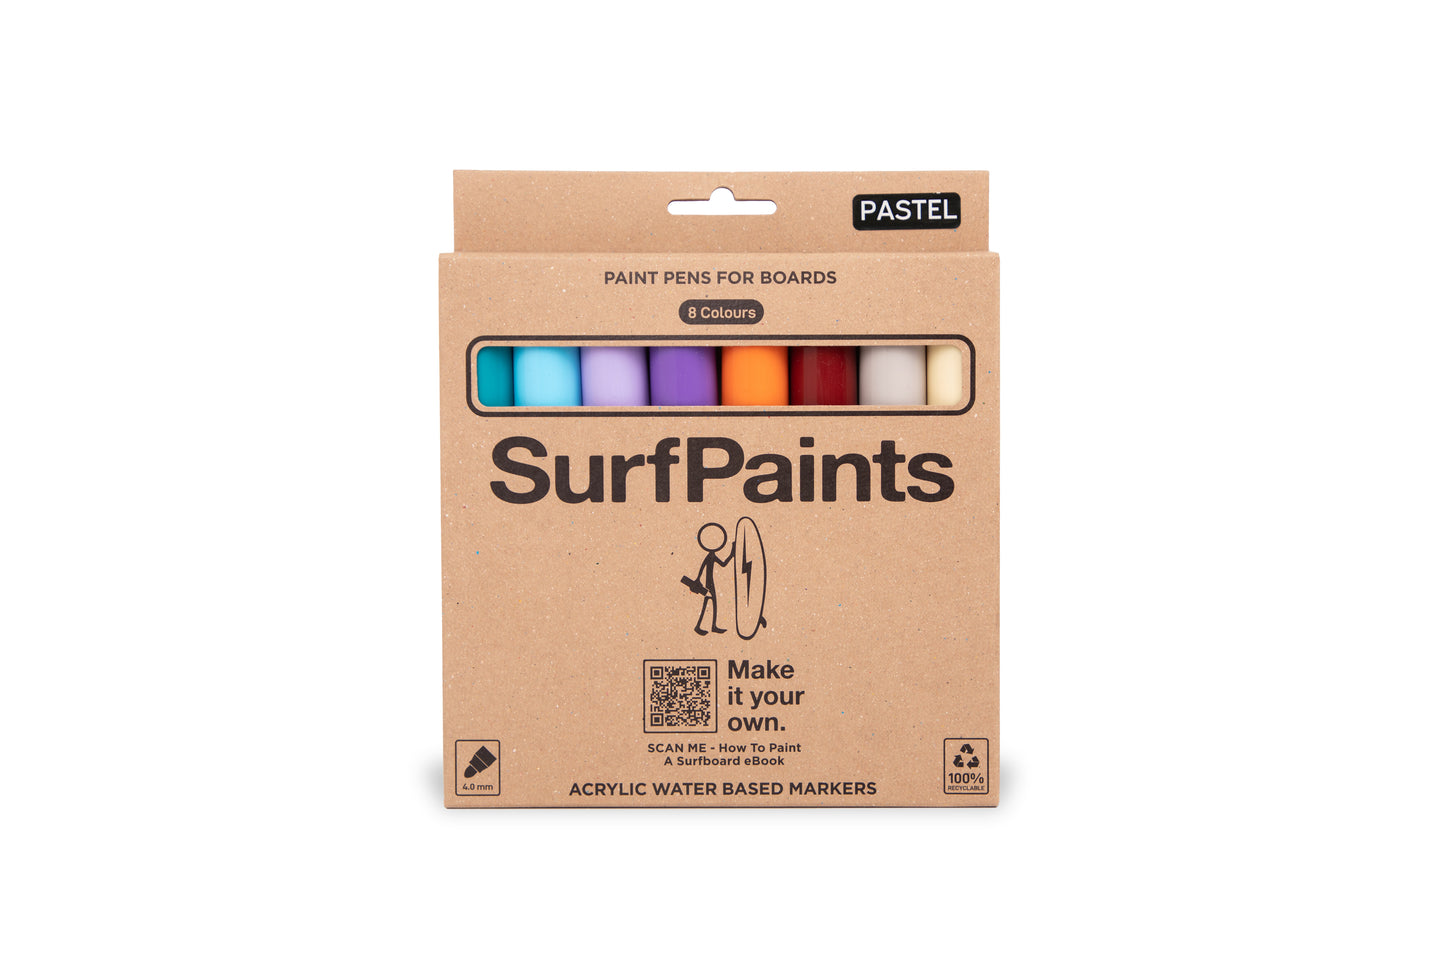 All-in-One Skateboard Art Kit: DIY Surface Prep, Paint & Customise - Includes Primary & Pastel Acrylic Sets